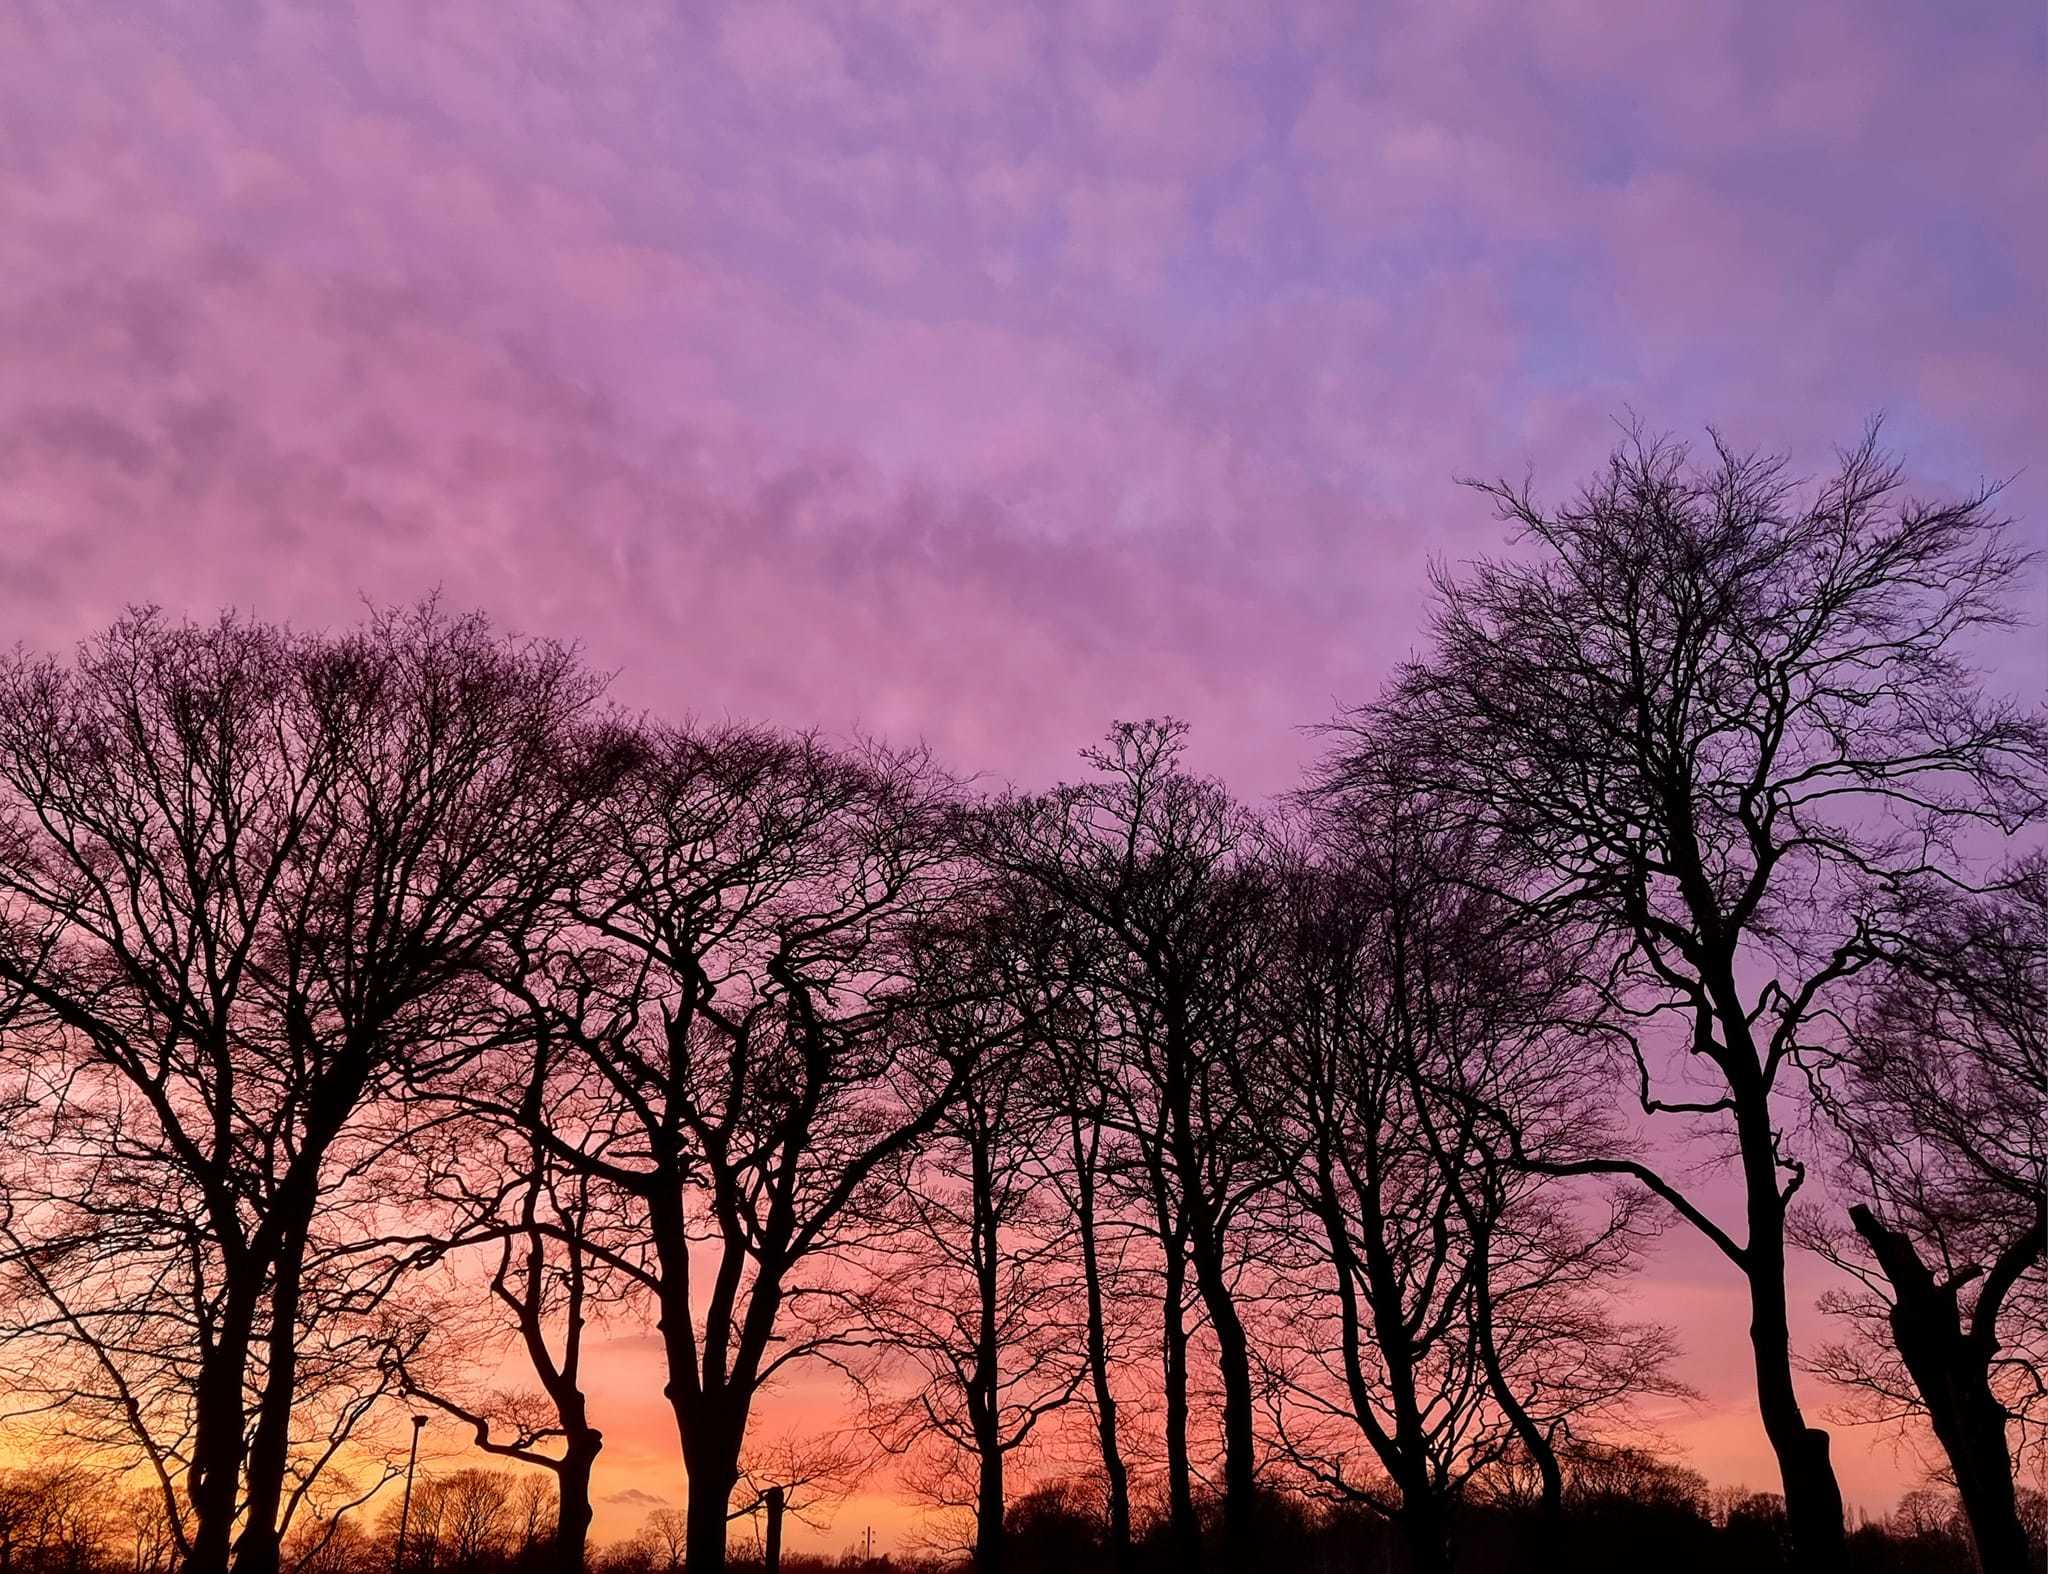 Colourful skies in Sherdley Park by Suzy Makin